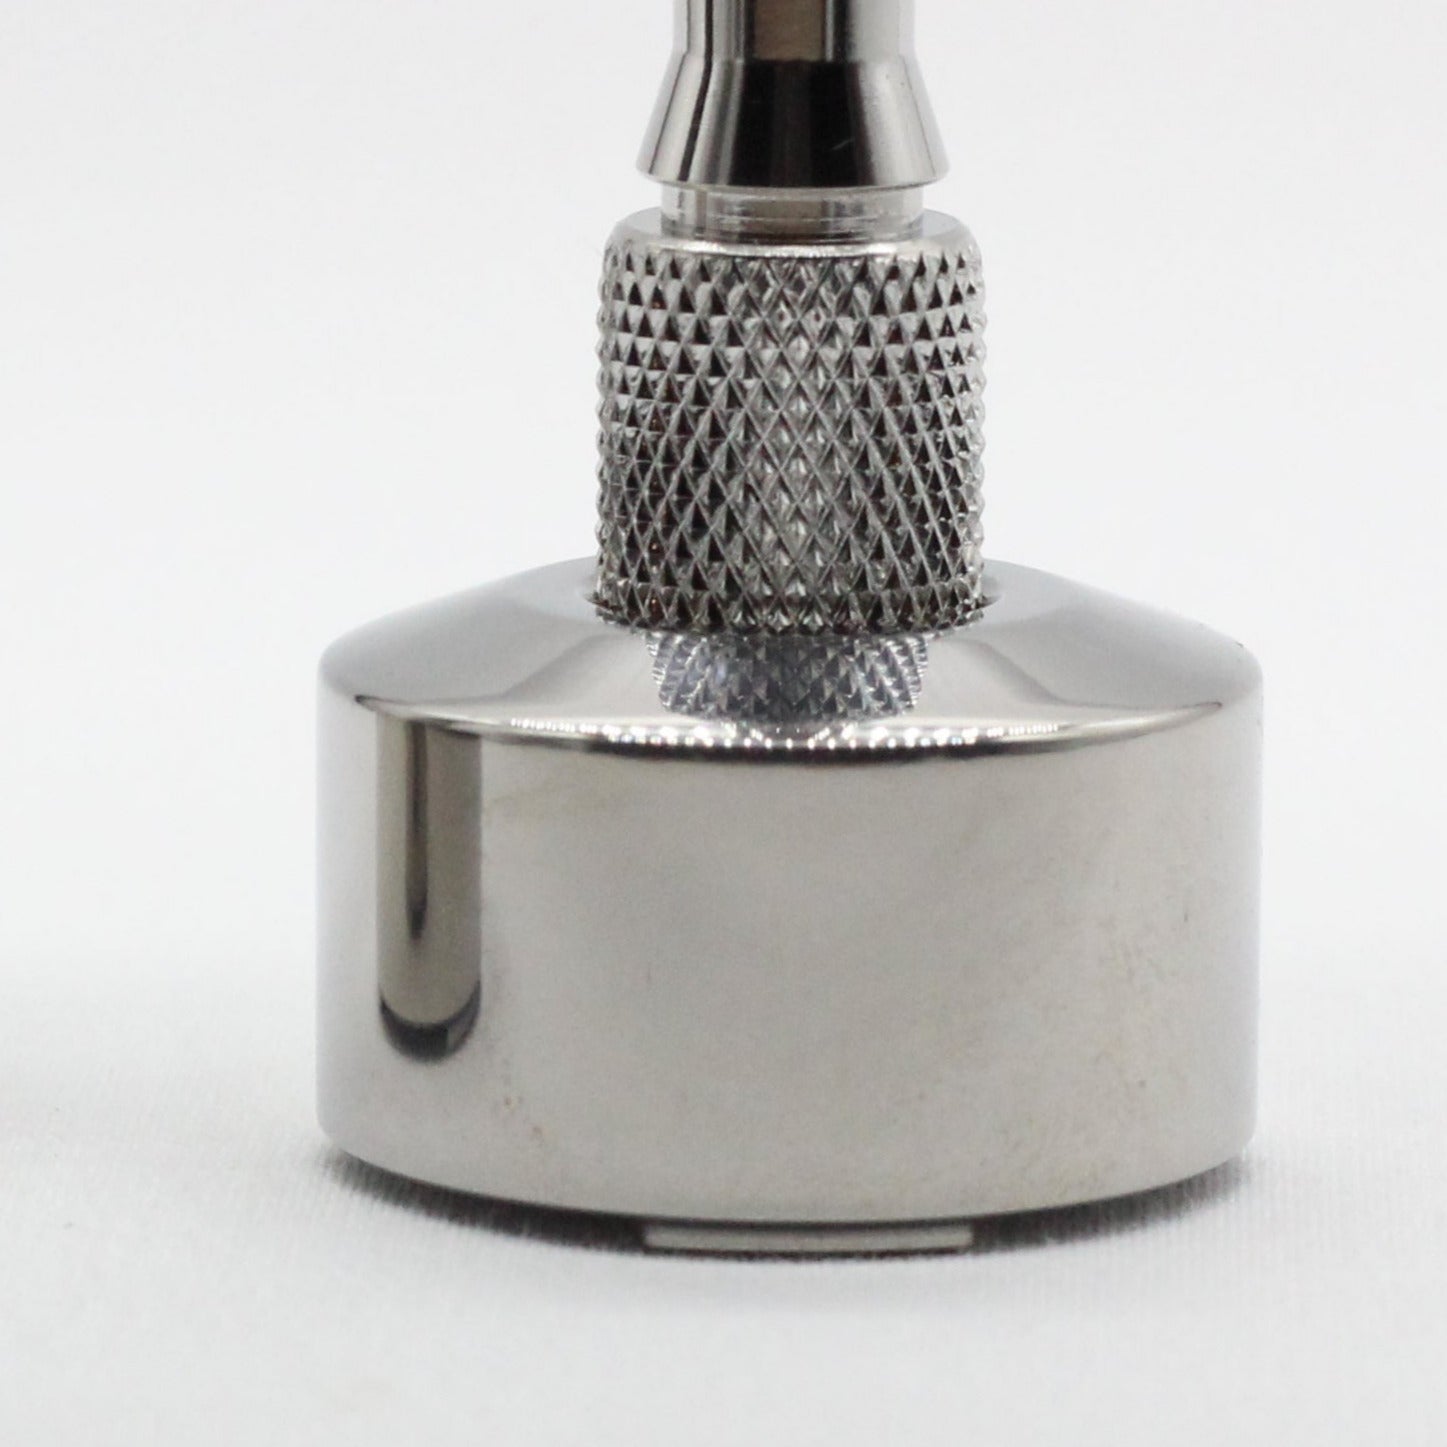 Snug fit safety razor stand - Close-up view - Titanium safety razor stand - Grade 5 Titanium alloy - Tripod feet to allow water and air to flow - polished finish - works with all carbon shaving co single edge safety shavers